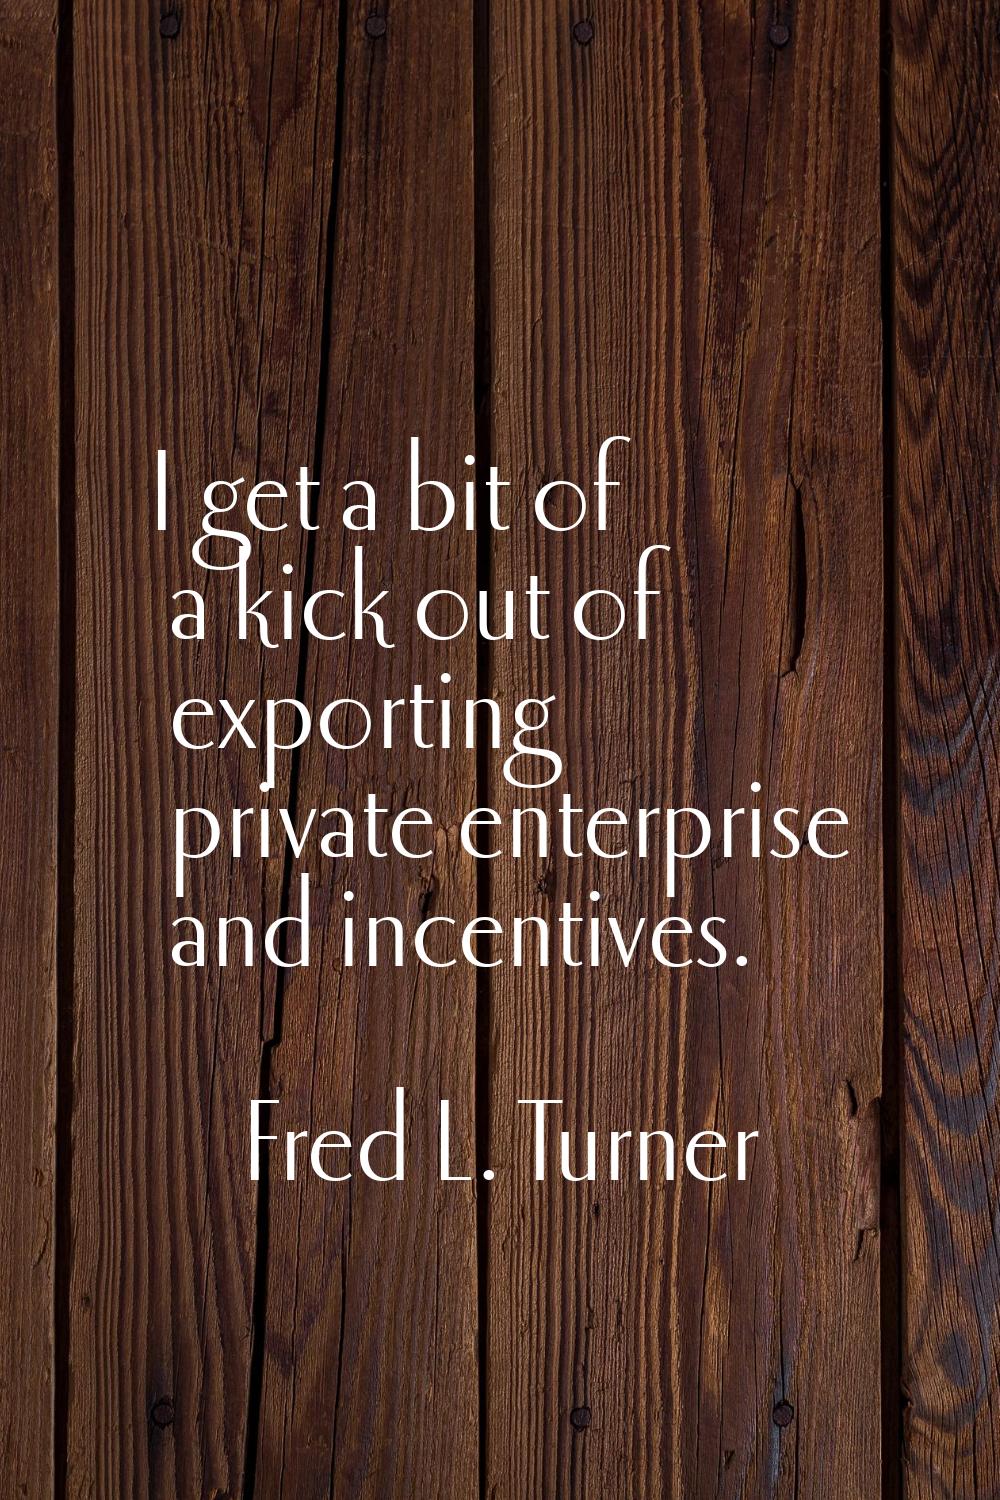 I get a bit of a kick out of exporting private enterprise and incentives.